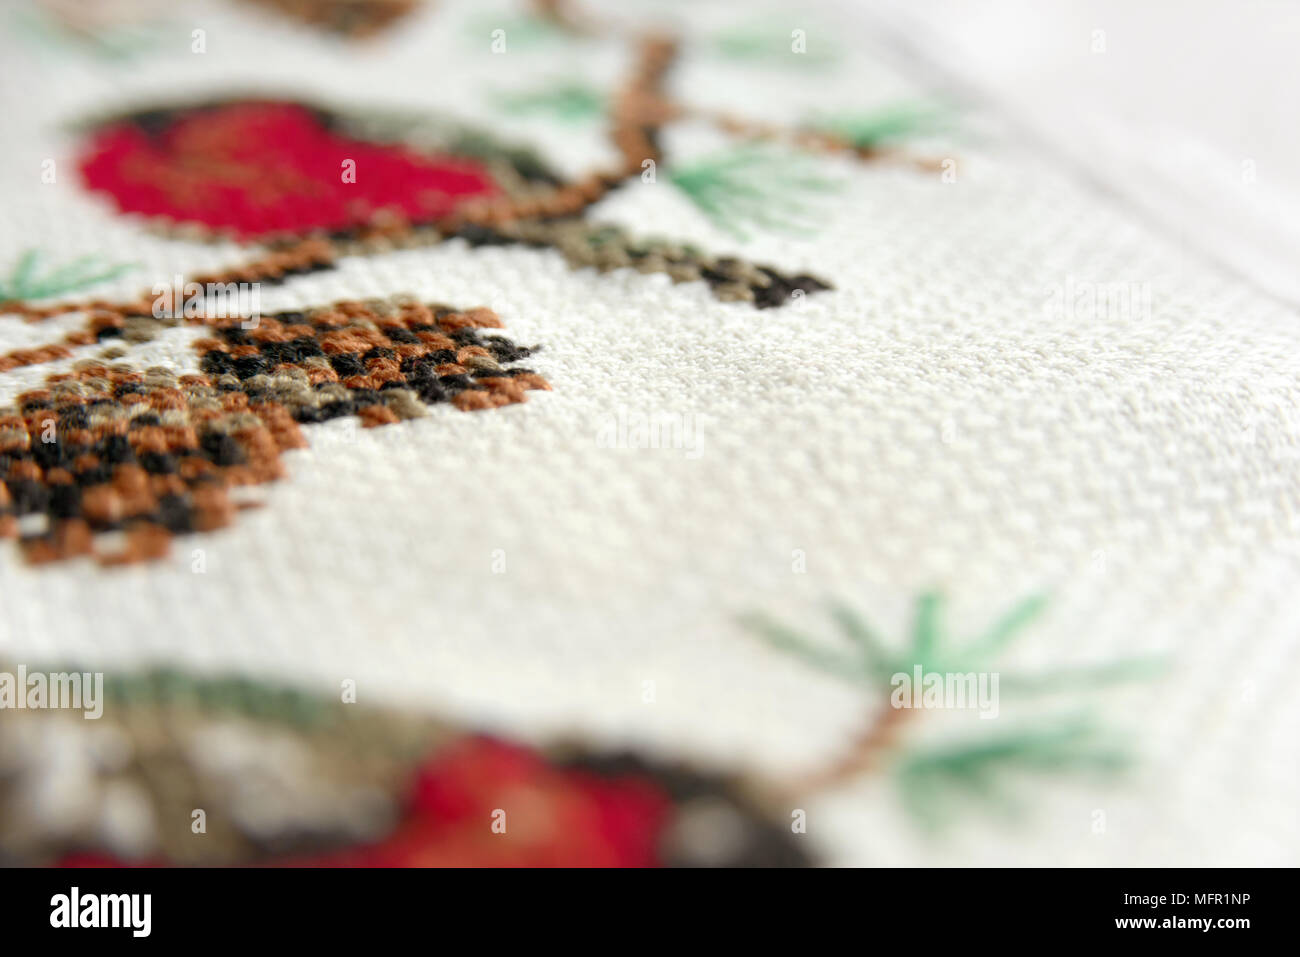 Cross-stitch embroidery. Red bullfinch on a fir-tree embroidery macro close up. View from above. Stock Photo